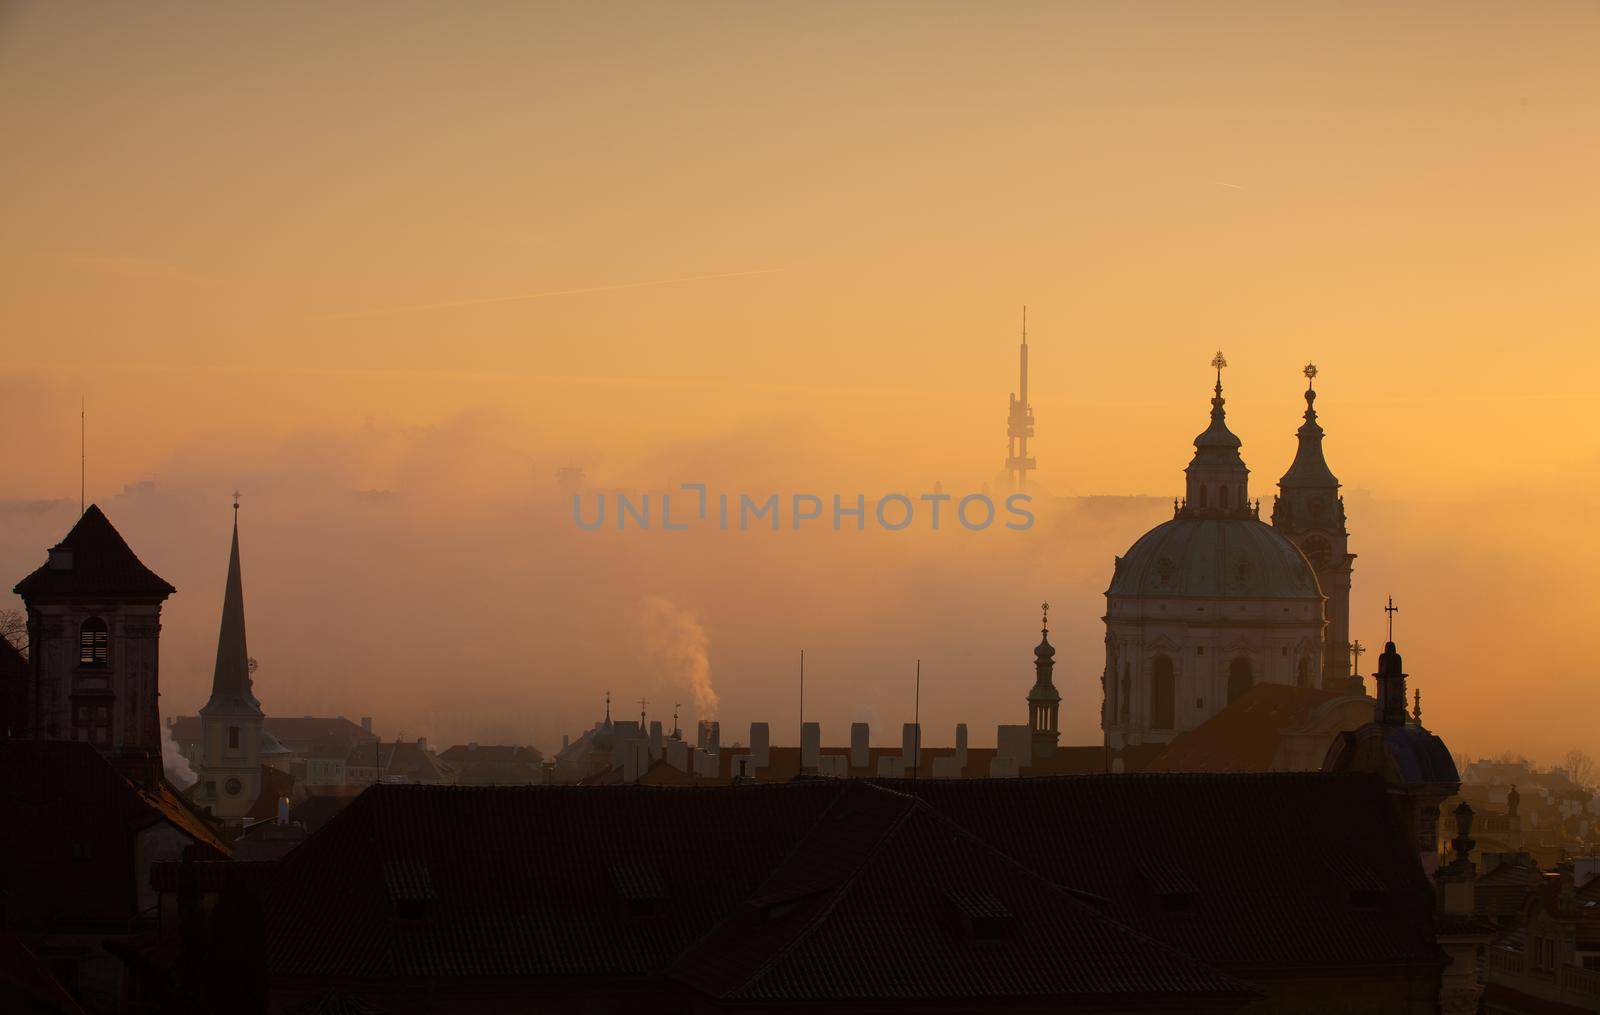 The Church of Saint Nicholas in the morning mist. by CaptureLight